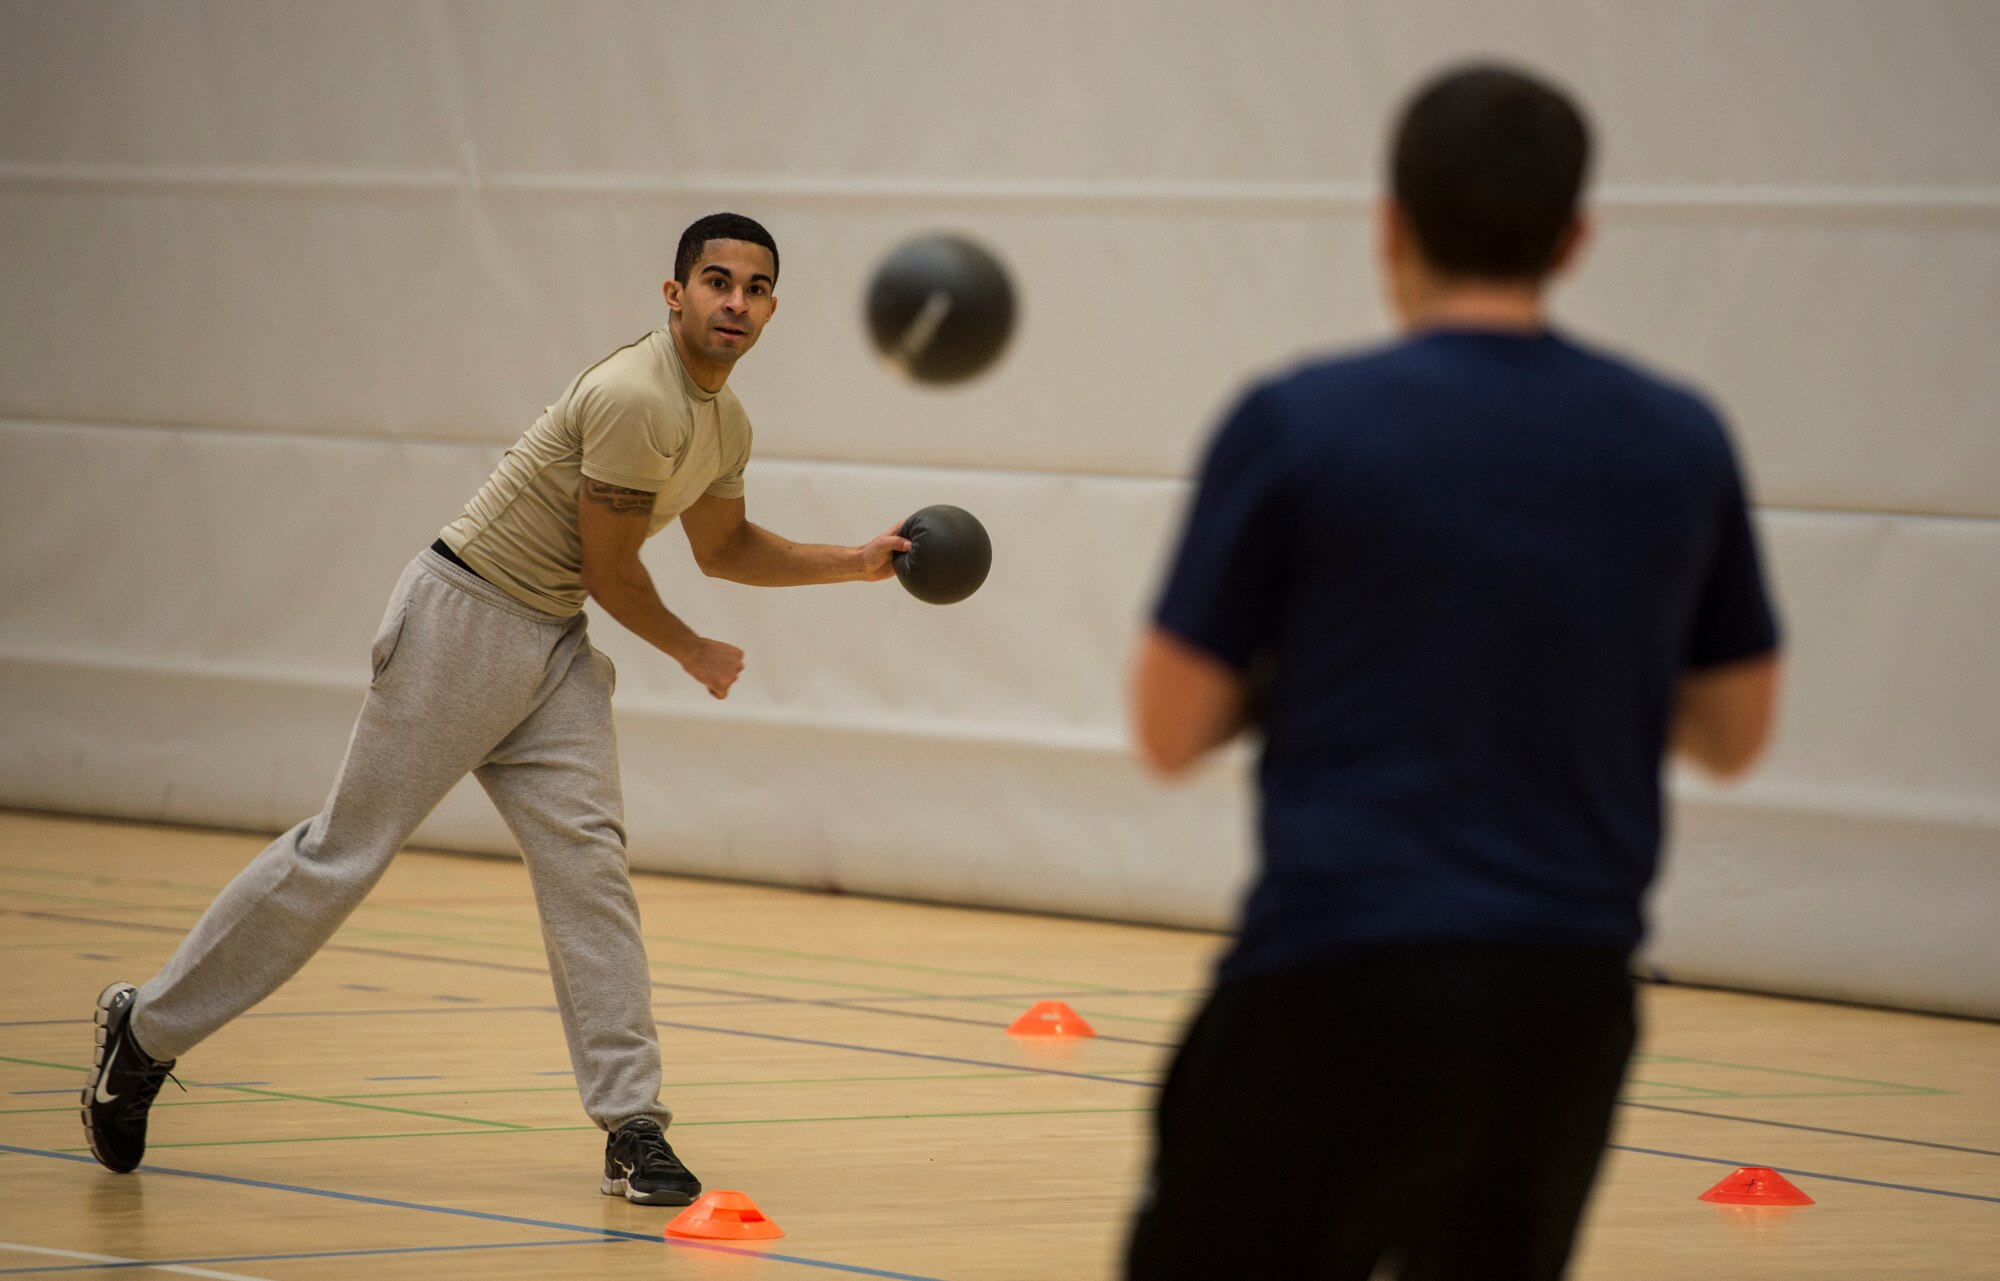 U.S. Air Force Senior Airman Sean Walker, American Forces Network Spangdahlem broadcast journalist, hurls a dodgeball at an opposing player during the RUFit Dodgeball Tournament in the fitness center Dec. 11, 2015, at Spangdahlem Air Base, Germany. Information booths from the four pillars of RUFit, social, mental, spiritual and physical, were set up to provide information to the players during the games. (U.S. Air Force photo by Staff Sgt. Christopher Ruano/Released)